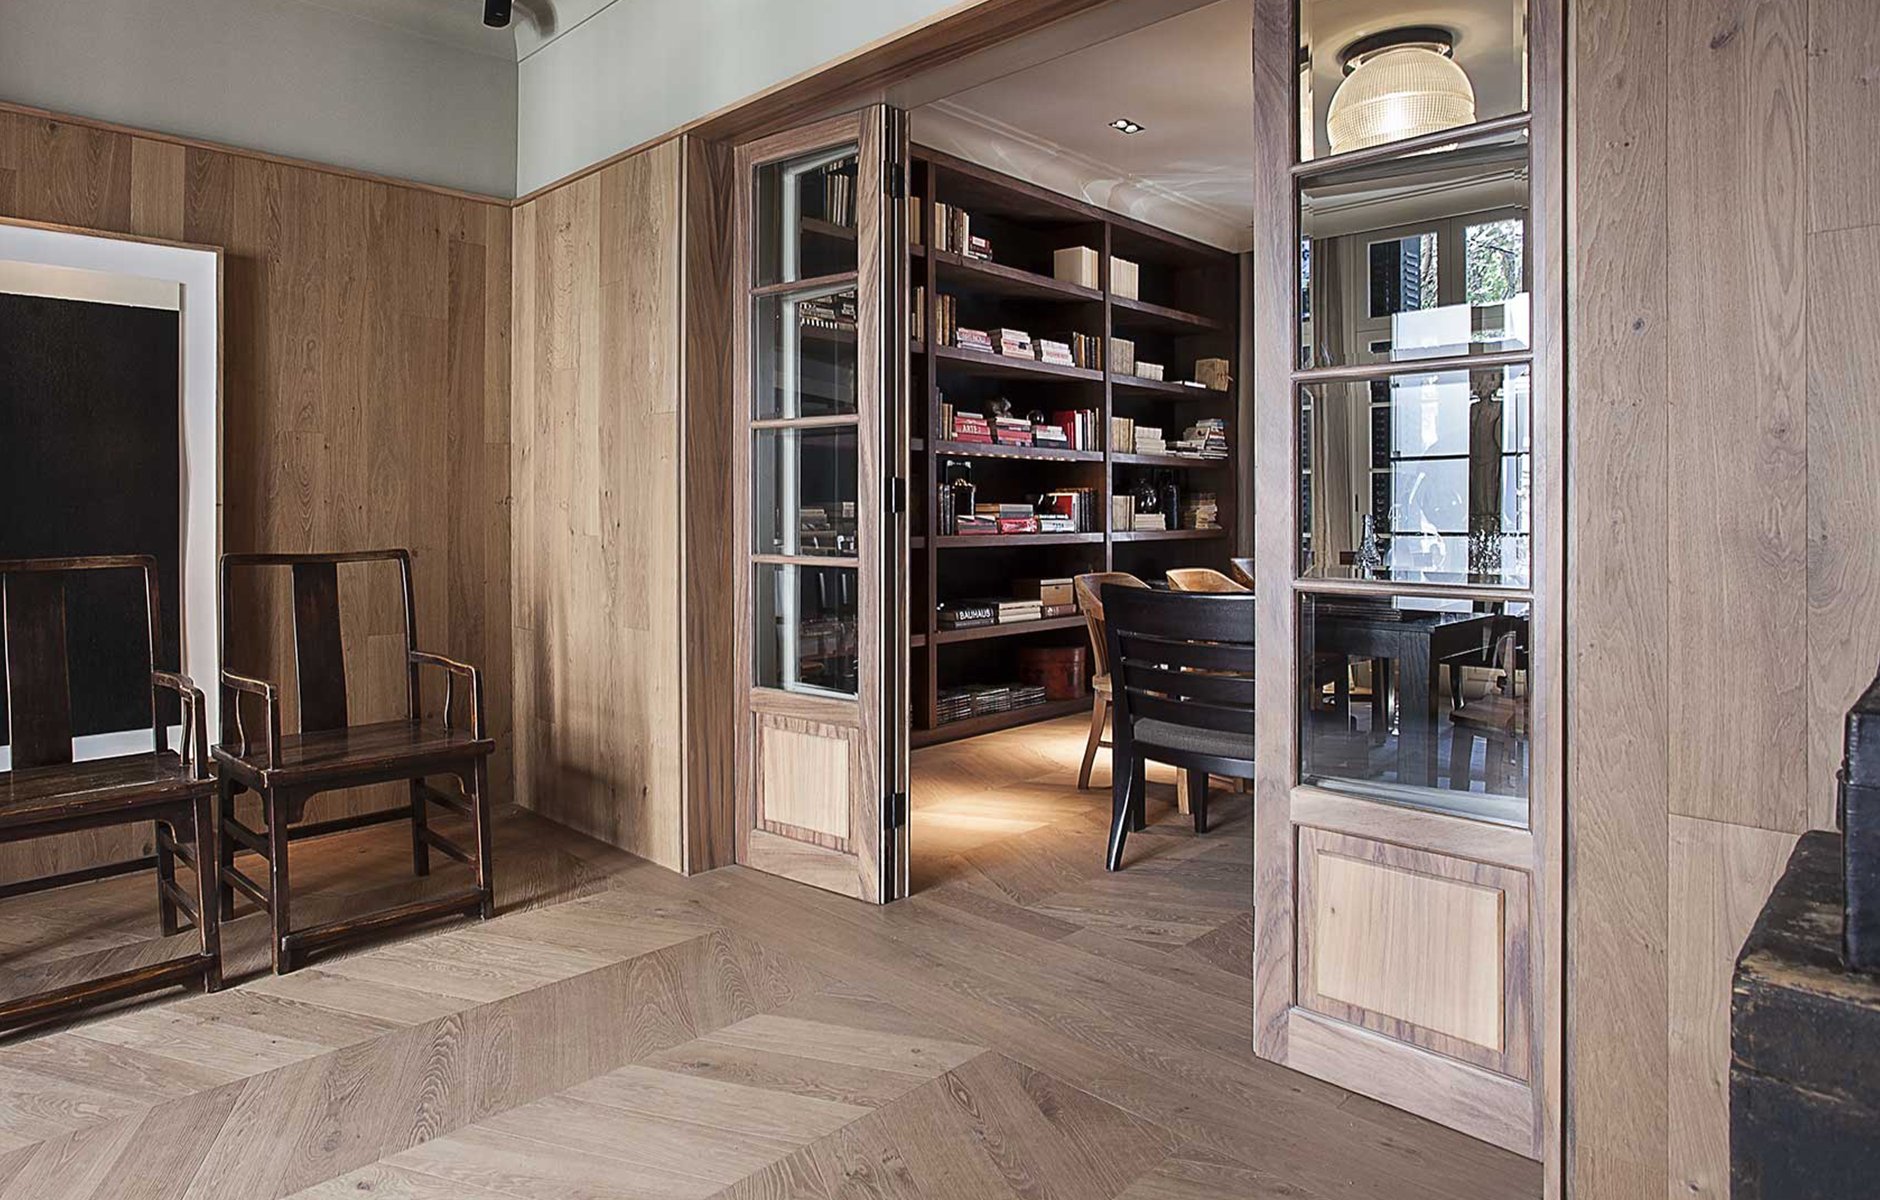 Featuring a special version of Heritage Civita with a steamed Oak finish, Rafael Rivera selected a refined Hungarian fishbone pattern on the floor and random straight planks on the walls and ceilings. Photo c/o Listone Giordano.